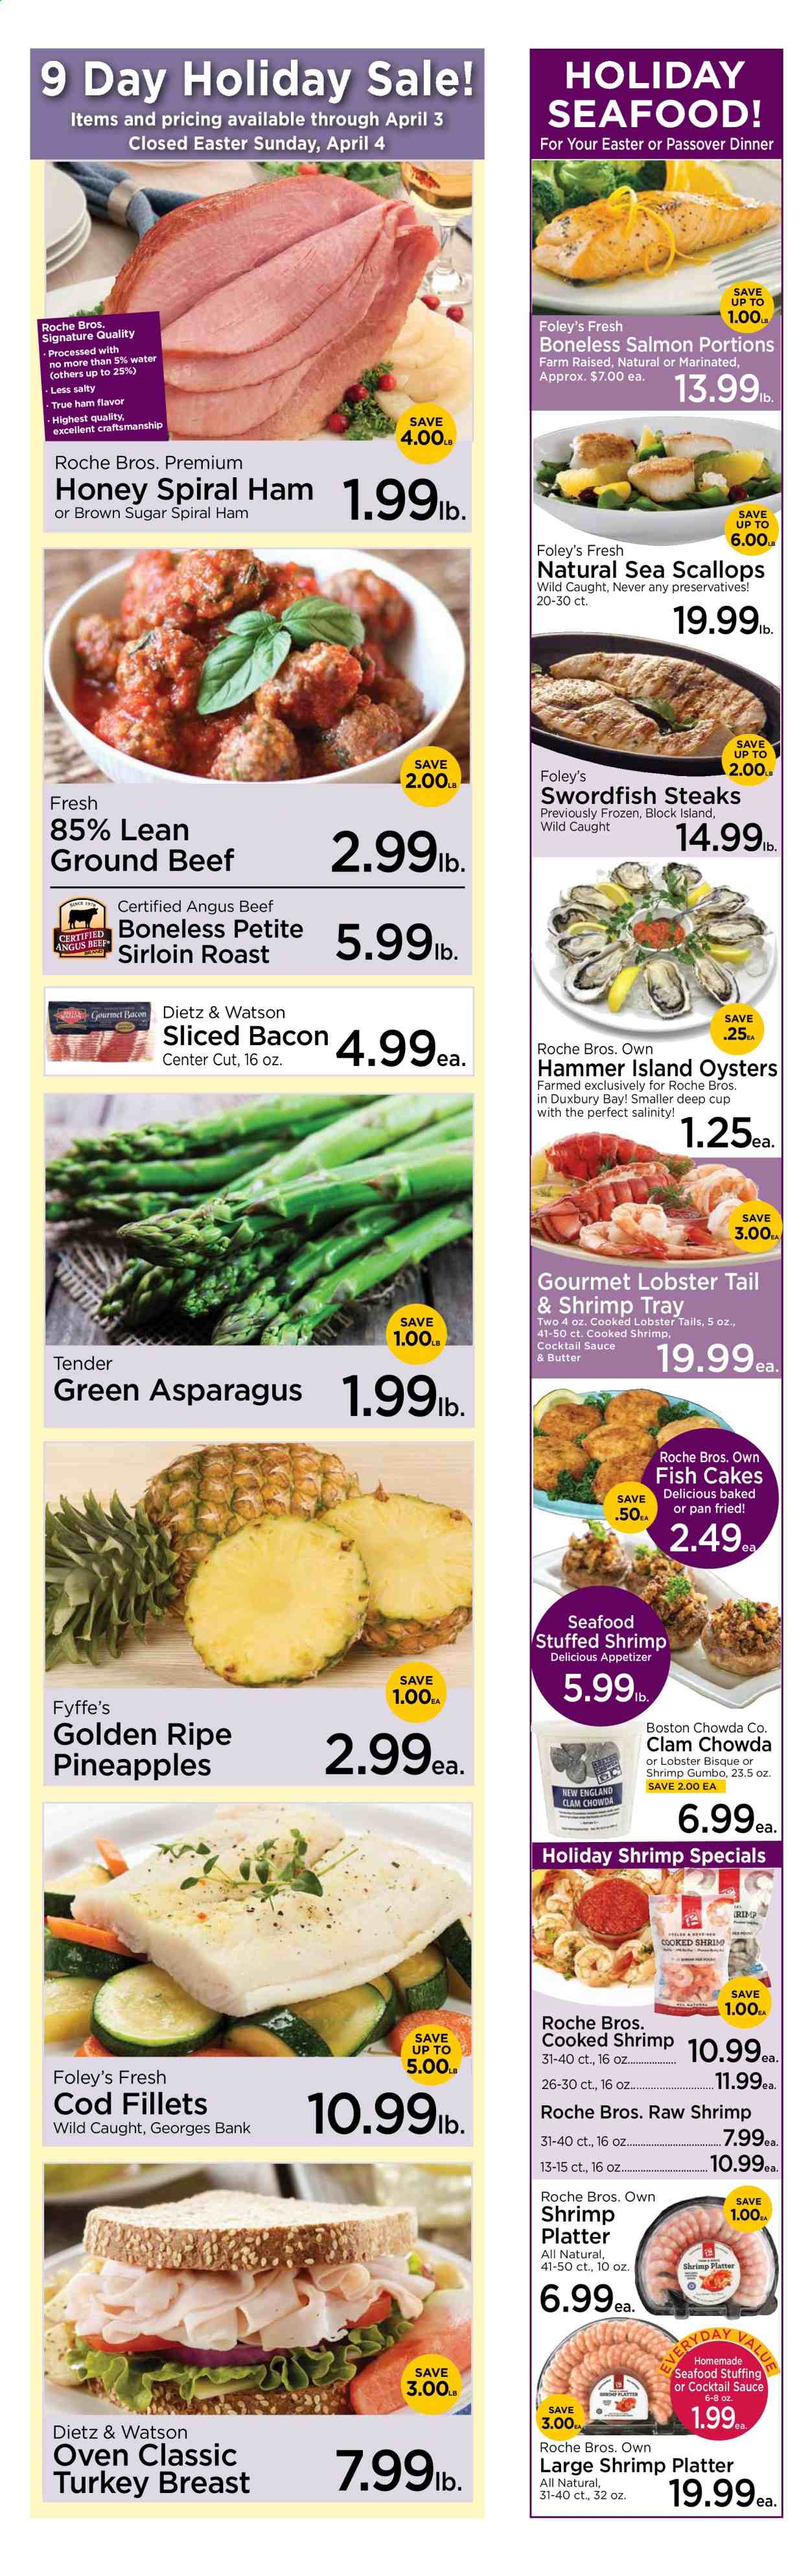 thumbnail - Roche Bros. Flyer - 03/26/2021 - 04/03/2021 - Sales products - bread, brownie mix, cupcake, pie, tart, Angel Food, fruit tart, coconut, clams, cod, lobster, salmon, scallops, oysters, seafood, fish, lobster tail, shrimps, Pillsbury, Barilla, bacon, ham, spiral ham, Dietz & Watson, shredded cheese, Sargento, custard, pudding, evaporated milk, condensed milk, eggs, fish cake, cookies, Nestlé, chocolate, Celebration, crackers, Kellogg's, Ghirardelli, Keebler, potato chips, all purpose flour, cocoa, Crisco, flour, frosting, granulated sugar, pie crust, Jell-O, vanilla extract, baking chips, cereals, pasta, nutmeg, cocktail sauce, canola oil, cooking spray, honey, peanut butter, raisins, walnuts, pistachios, Coca-Cola, Anisette, turkey breast, beef meat, ground beef, steak, Joy, Nutrish, hyacinth, tulip, bouquet, gelatin, pineapple. Page 2.